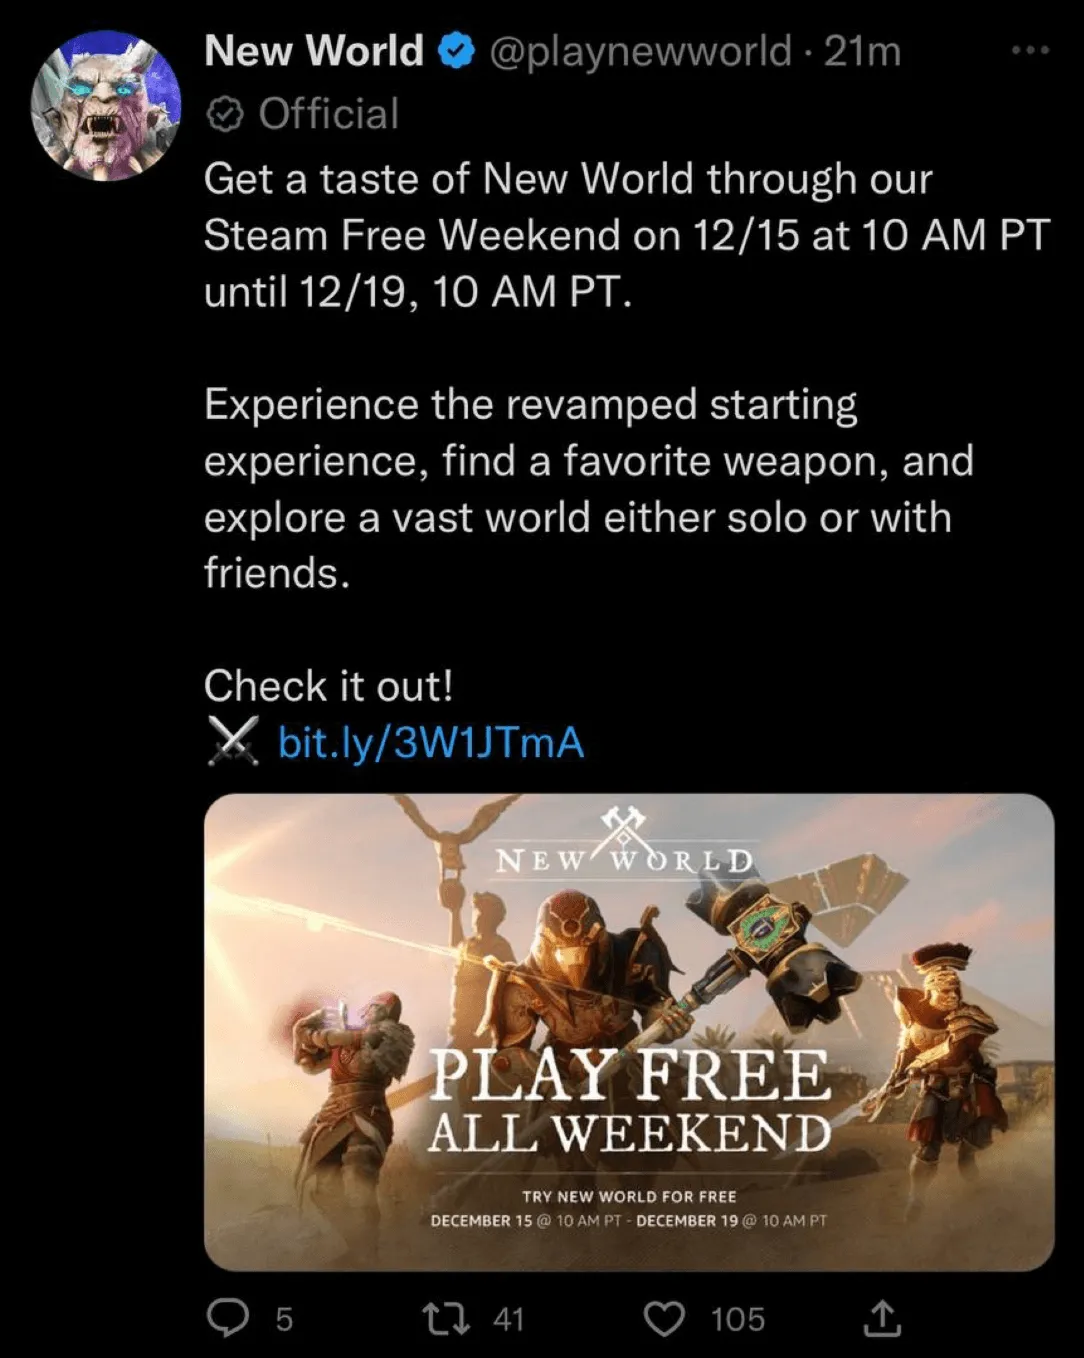 Announce of New World steam free weekend on Twitter